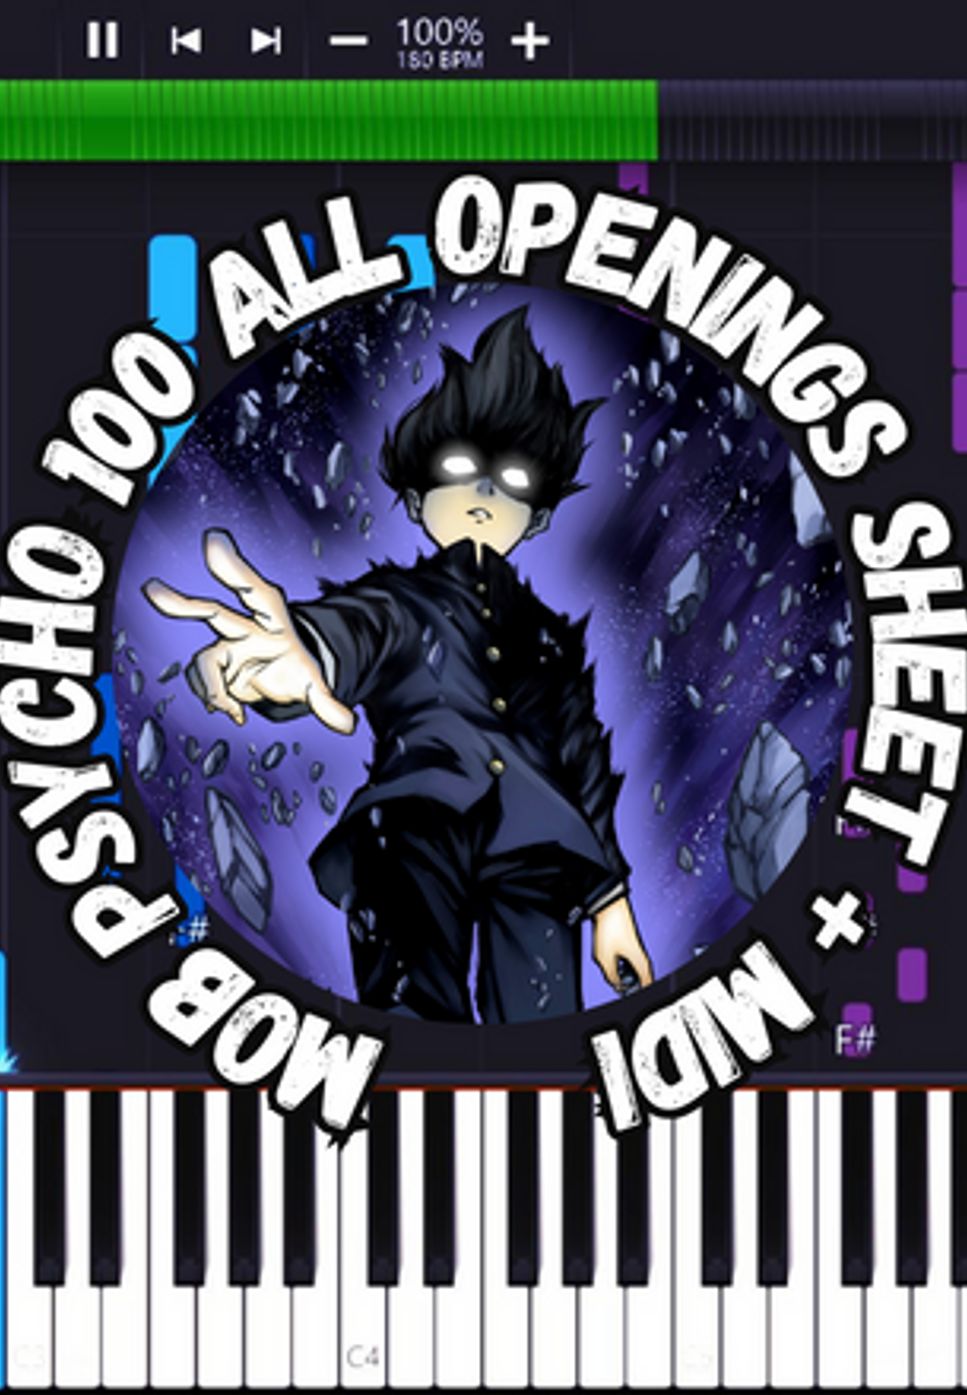 Mob Choir - Mob Psycho 100 All Openings (Mob Psycho 100) by Marco D.